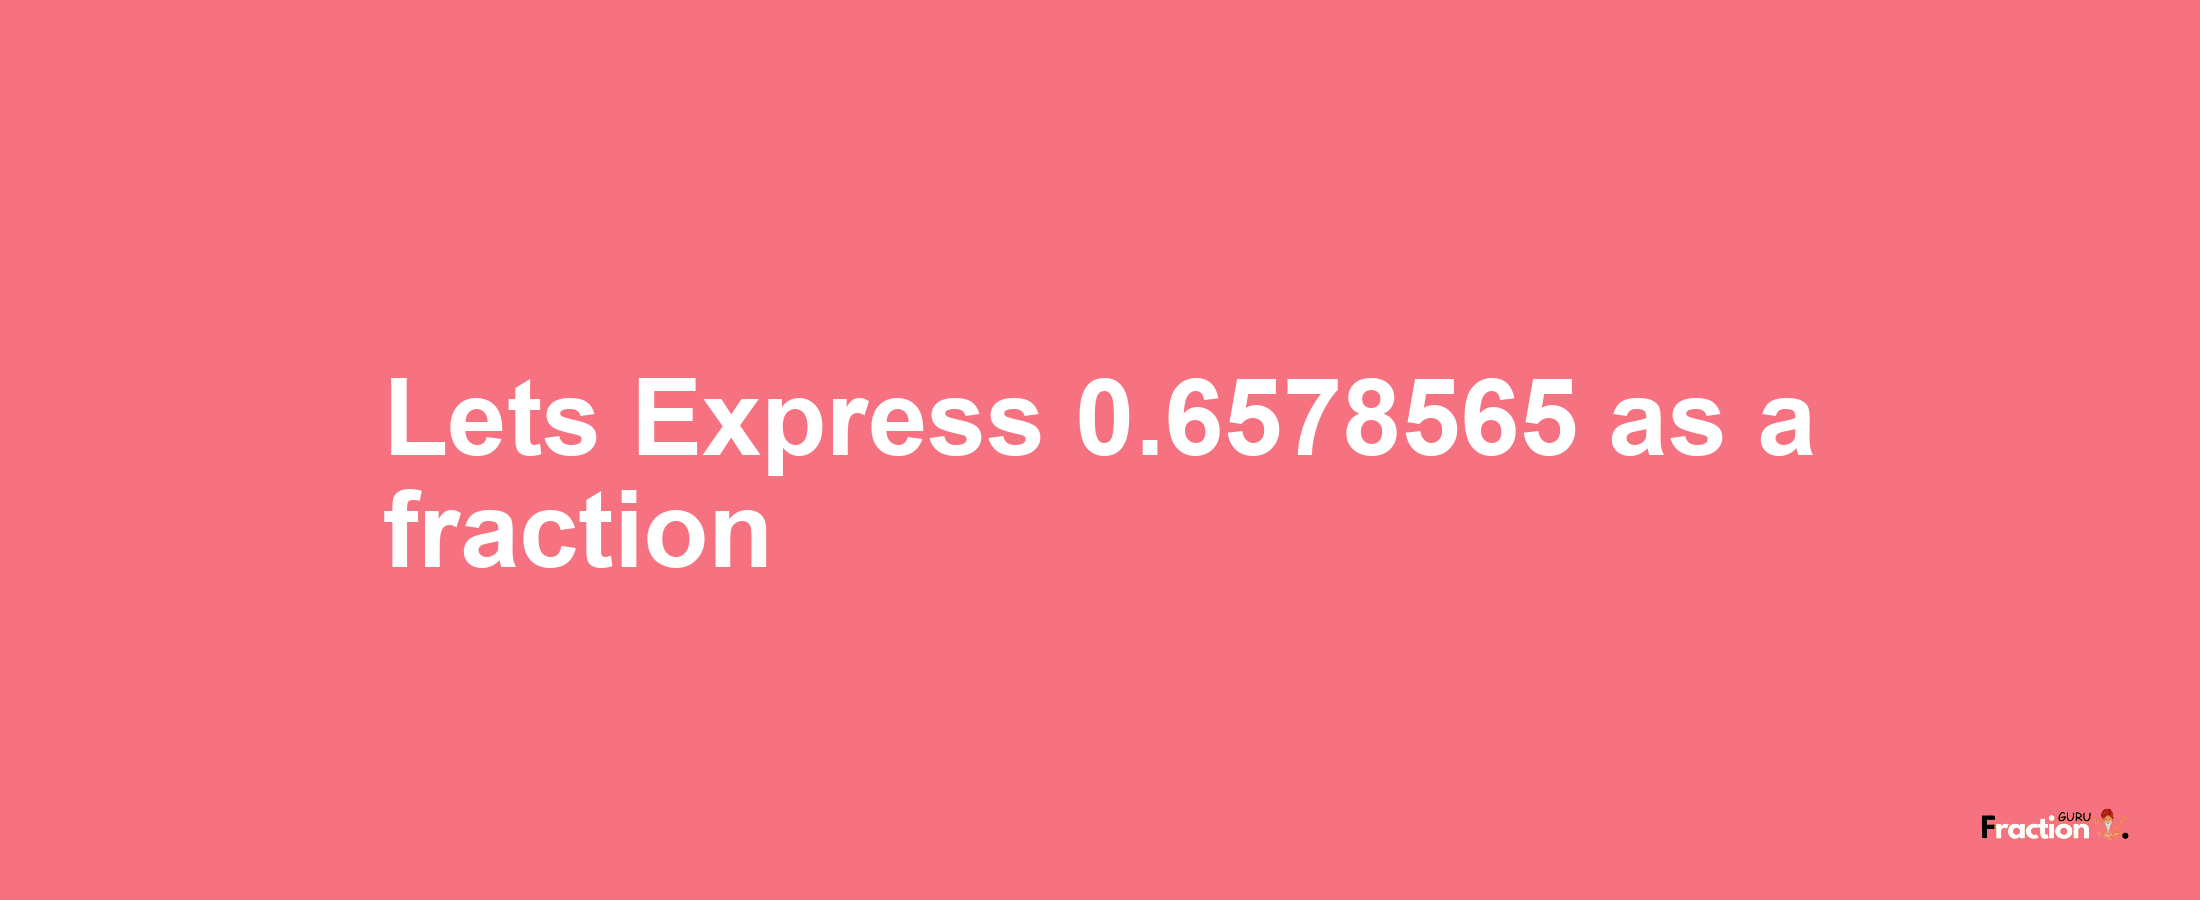 Lets Express 0.6578565 as afraction